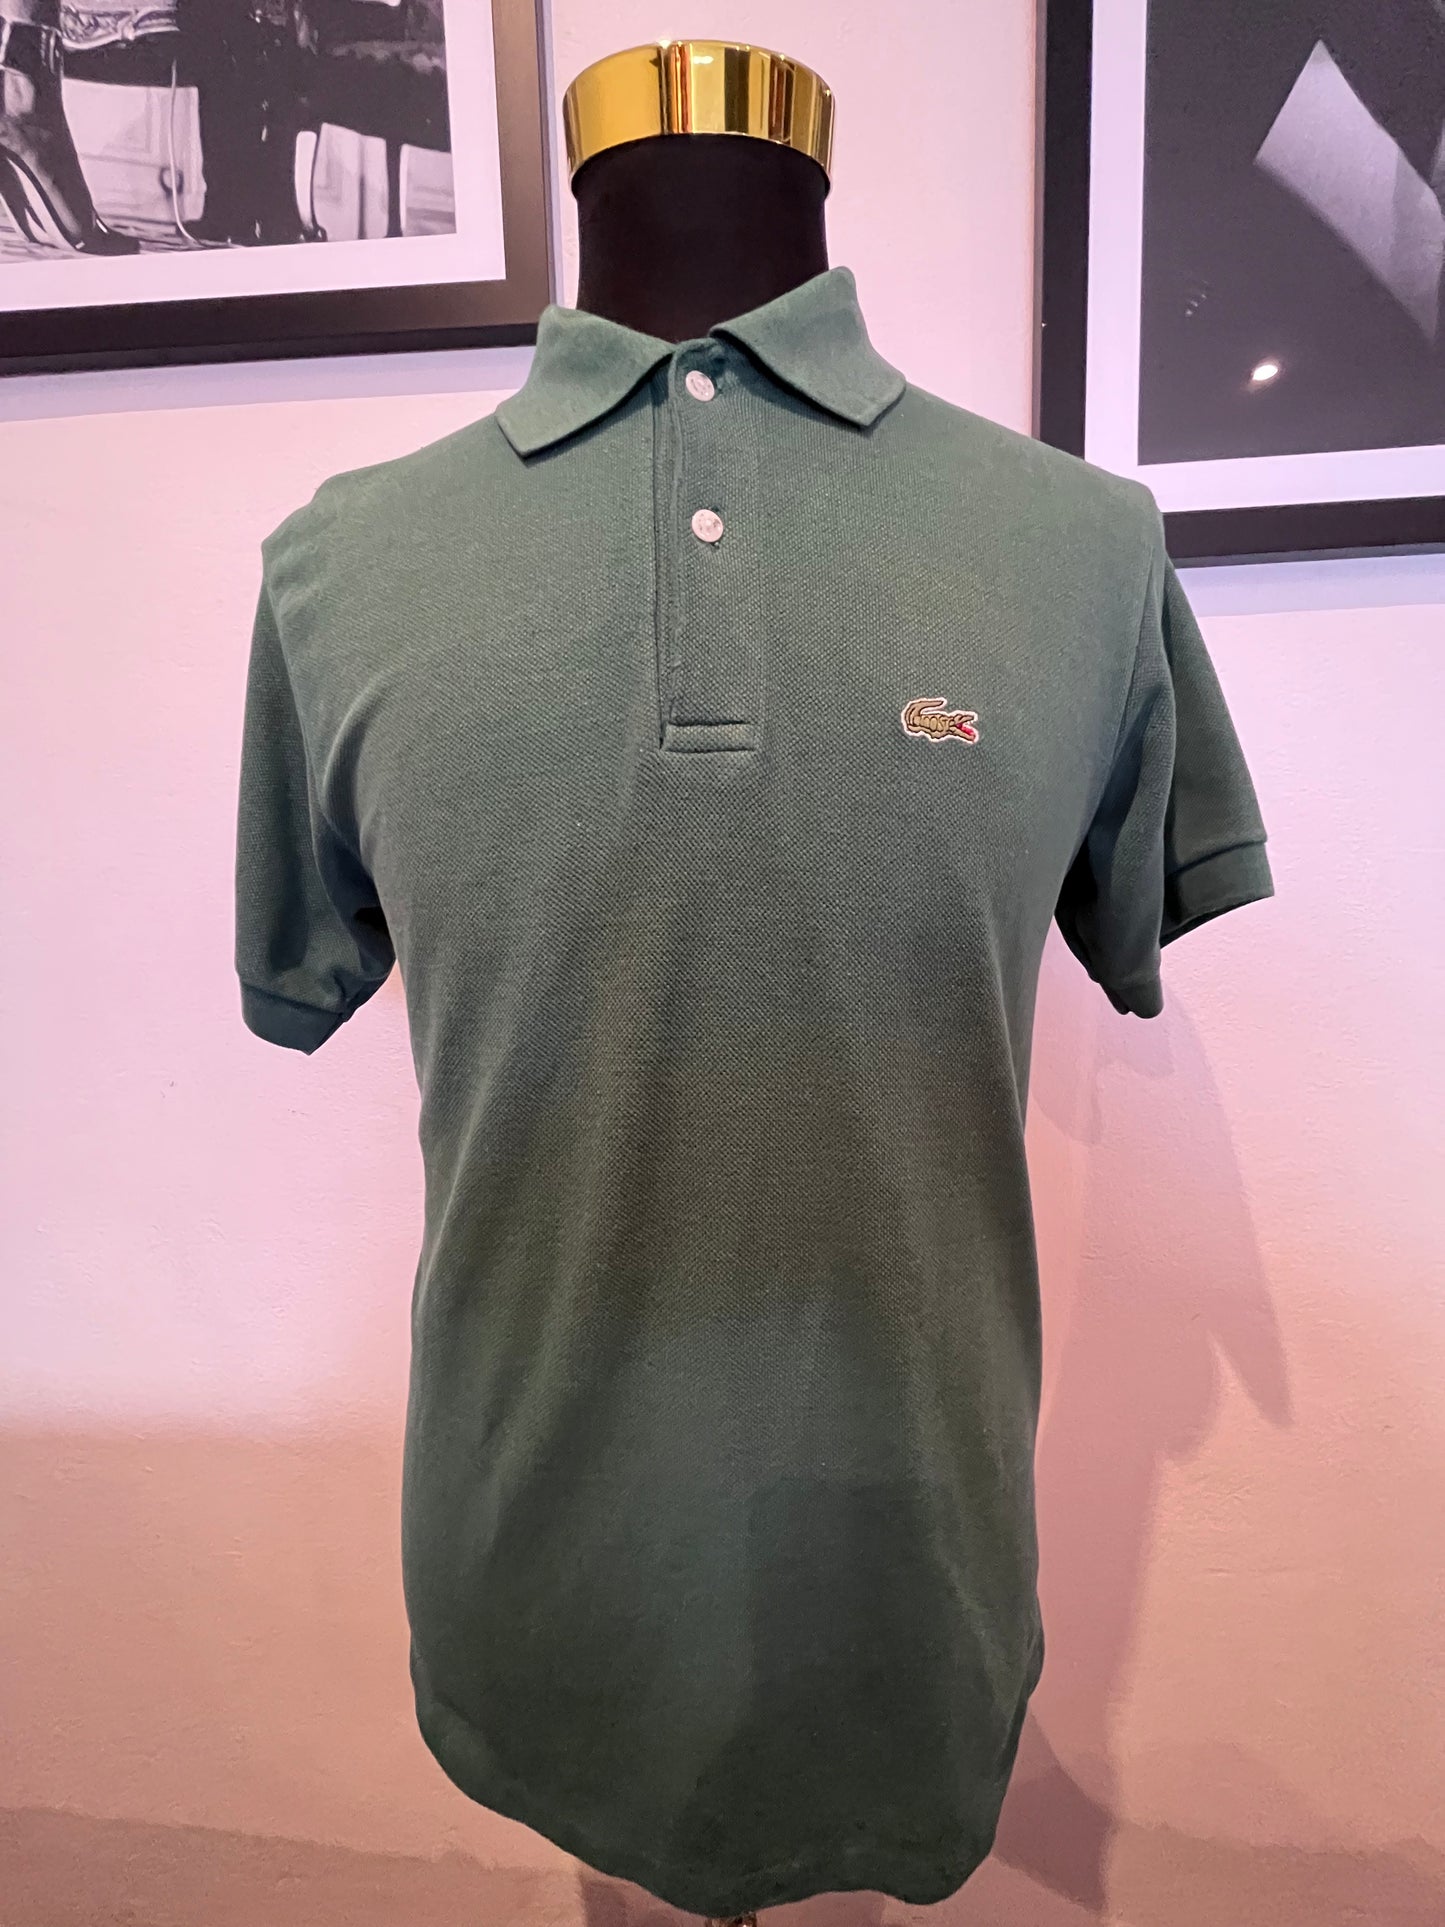 Lacoste 100% Racing Green Polo Shirt Size US Large Regular Fit Made in France